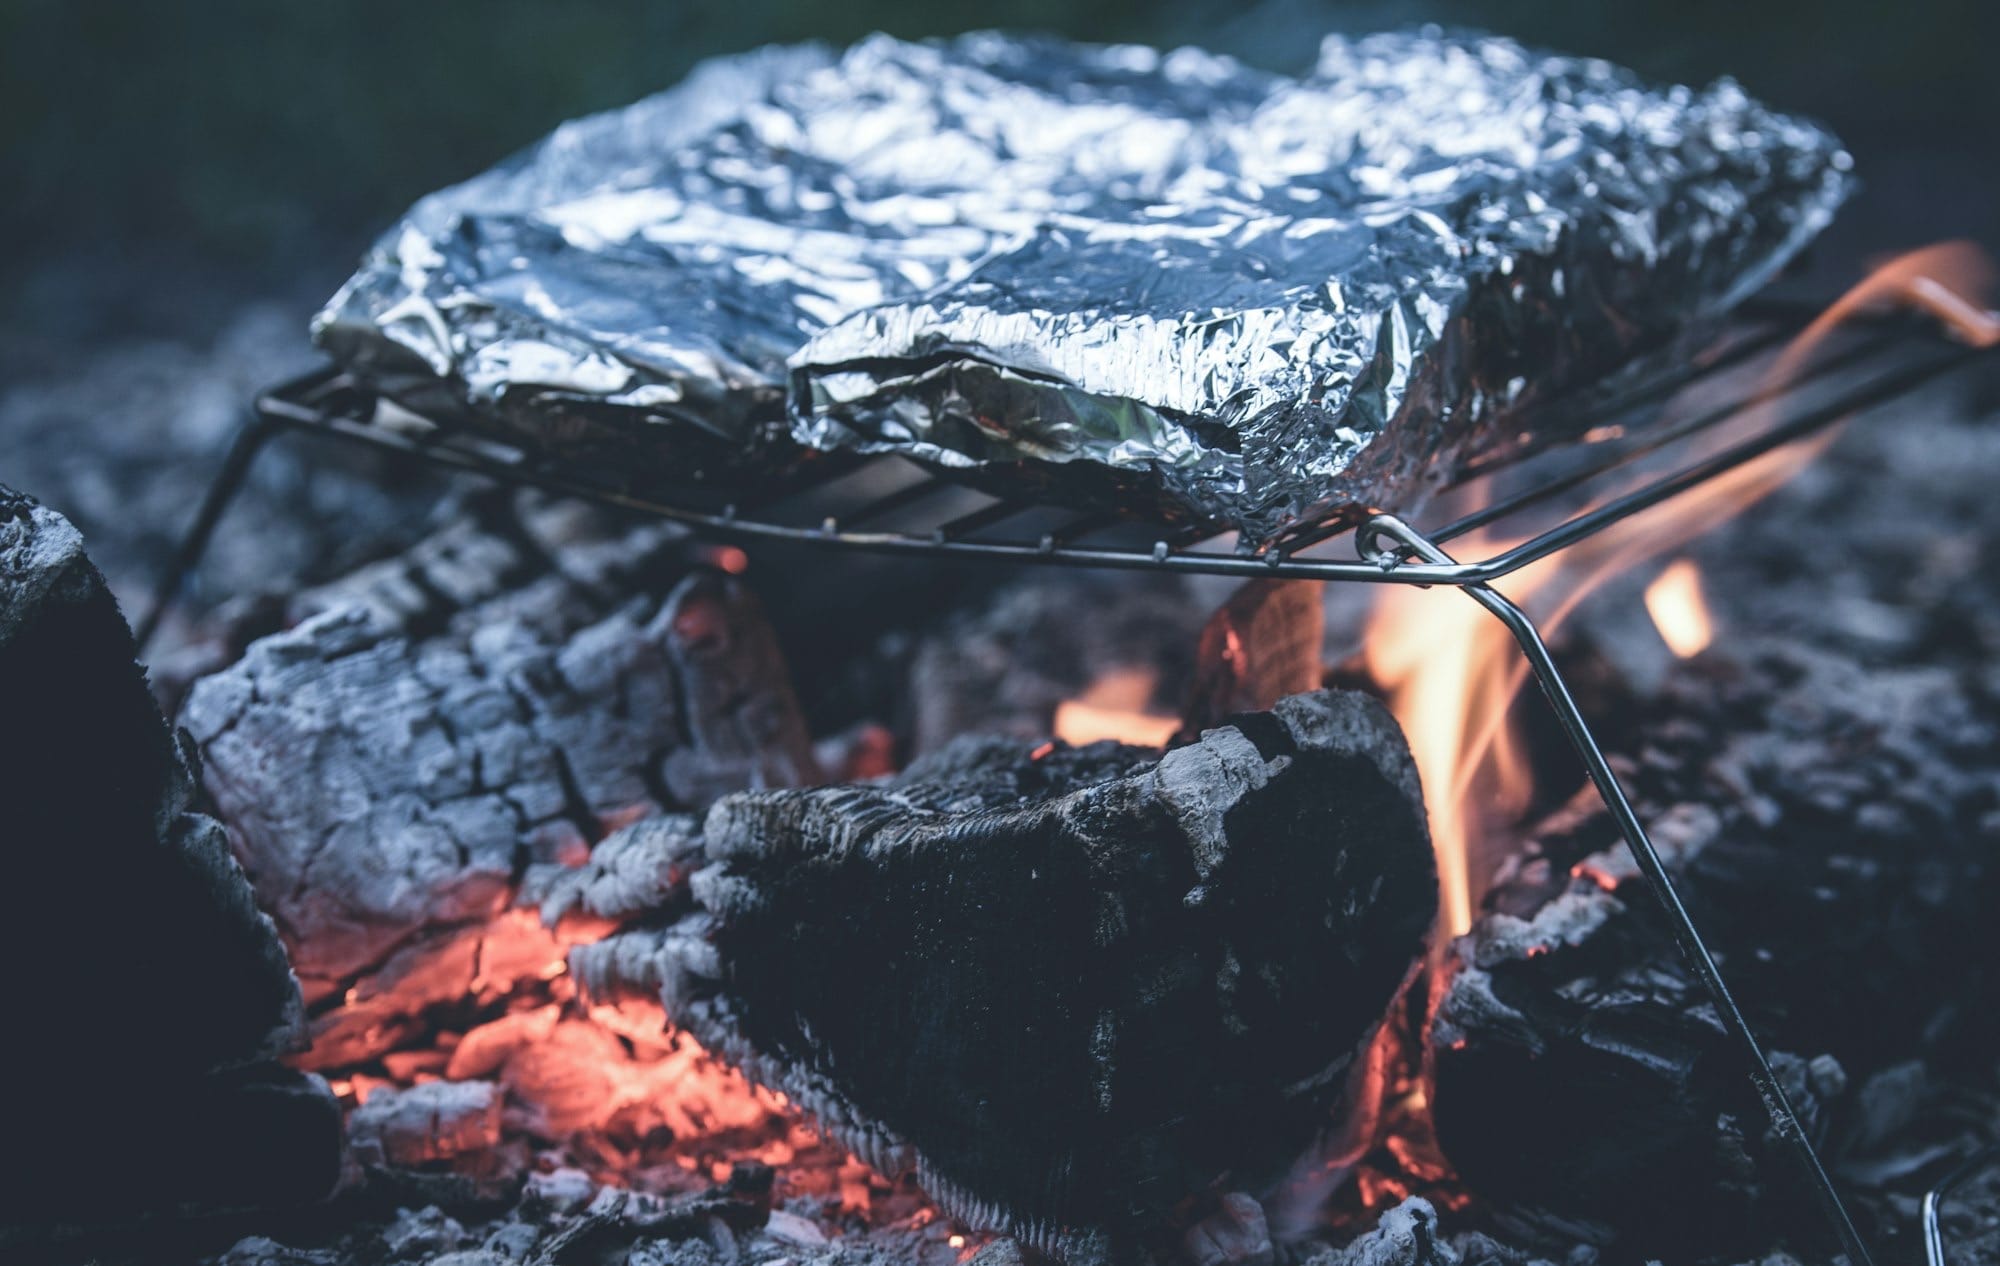 nachos on foil grilled on charcoal